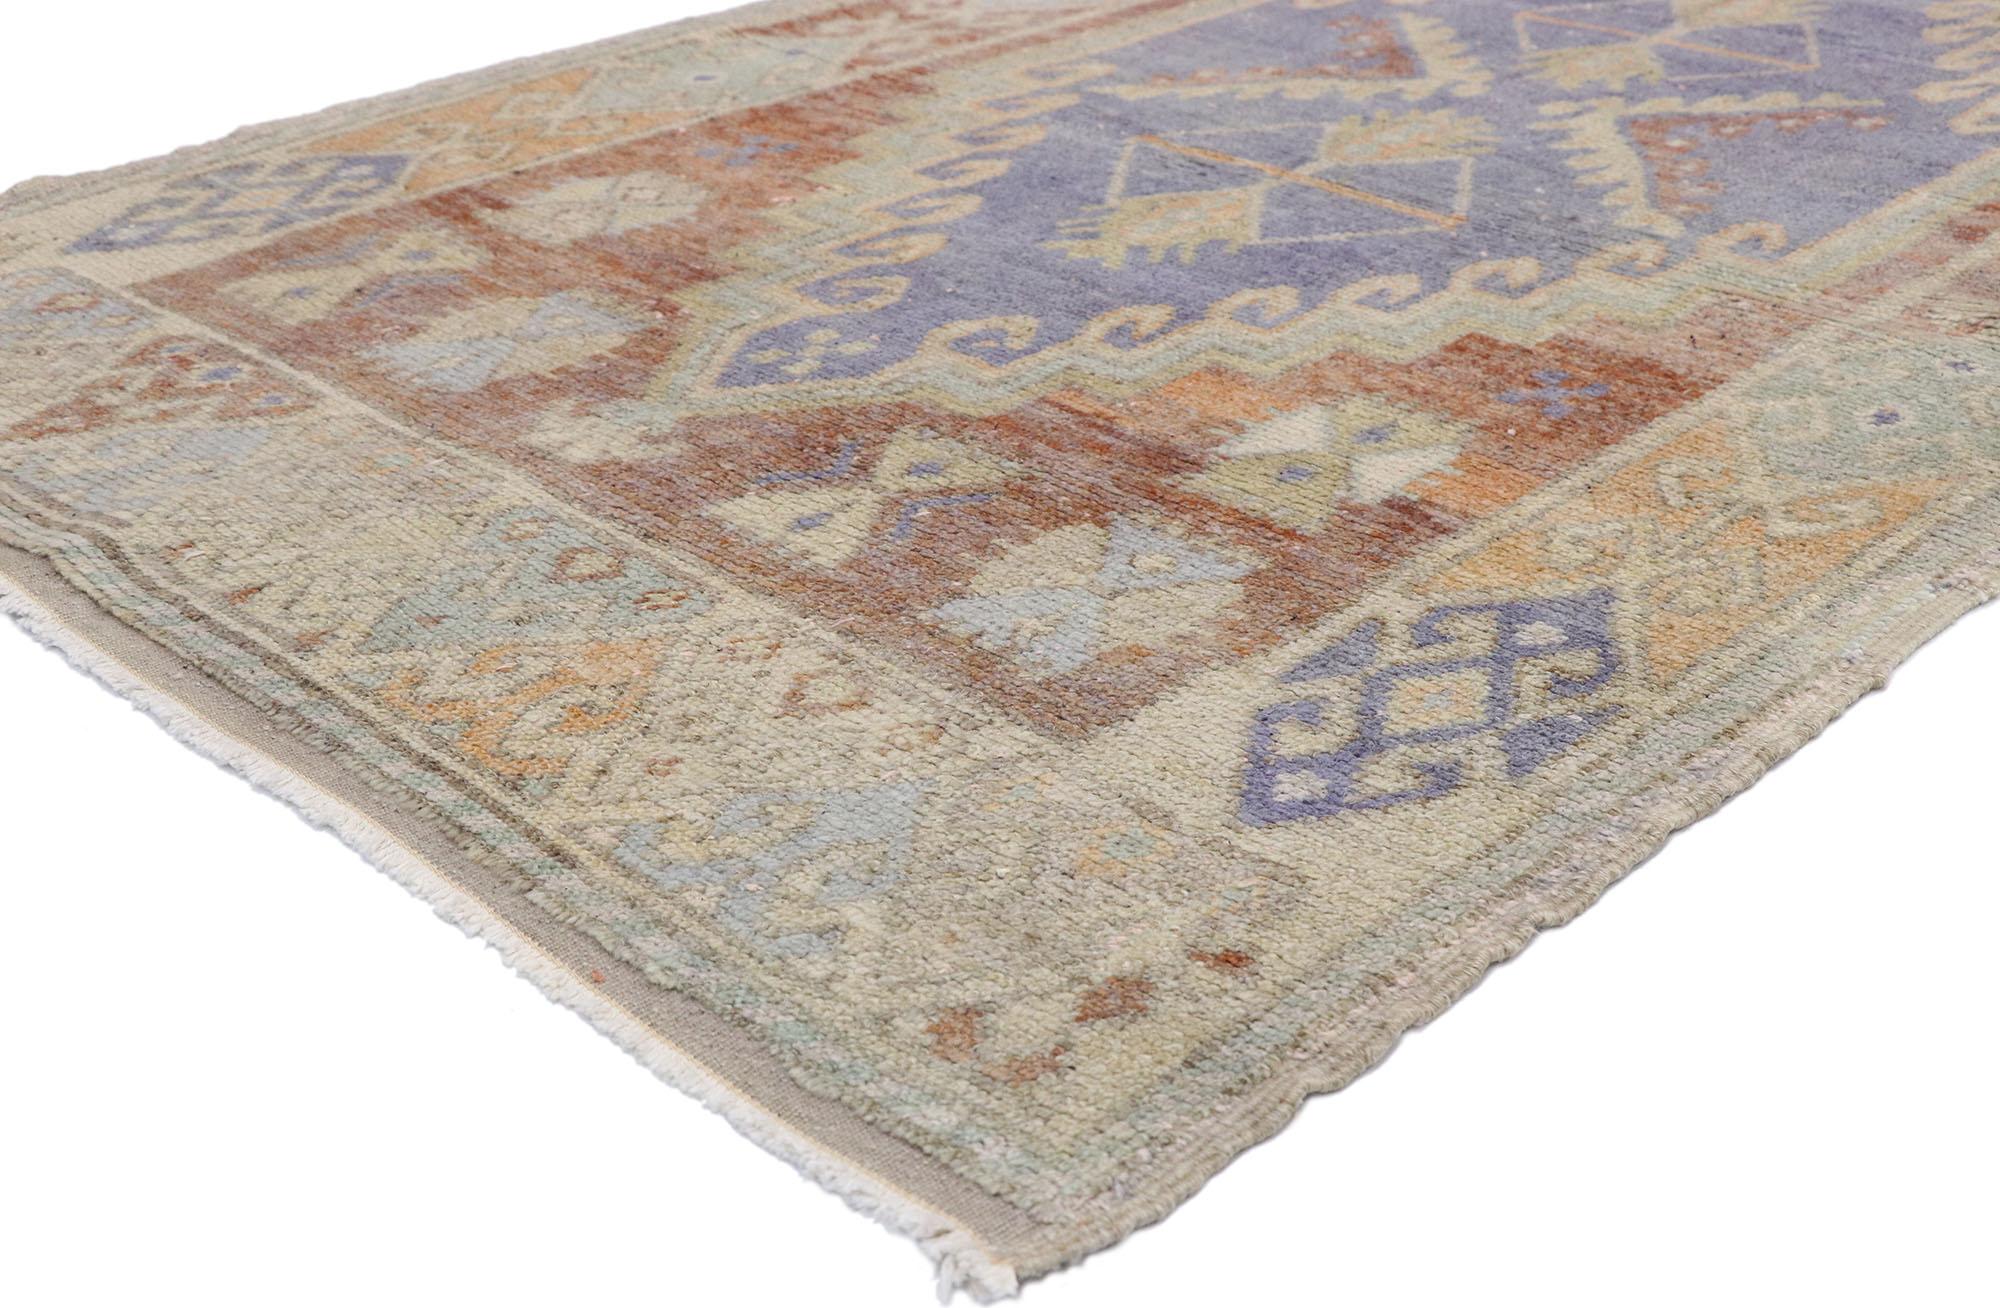 52740 vintage Turkish Oushak runner with rustic French and Georgian style 03'07 x 11'03. With its soft and delicate color palette and bold geometric form, this hand knotted wool vintage Turkish Oushak runner embodies both rustic French and Georgian